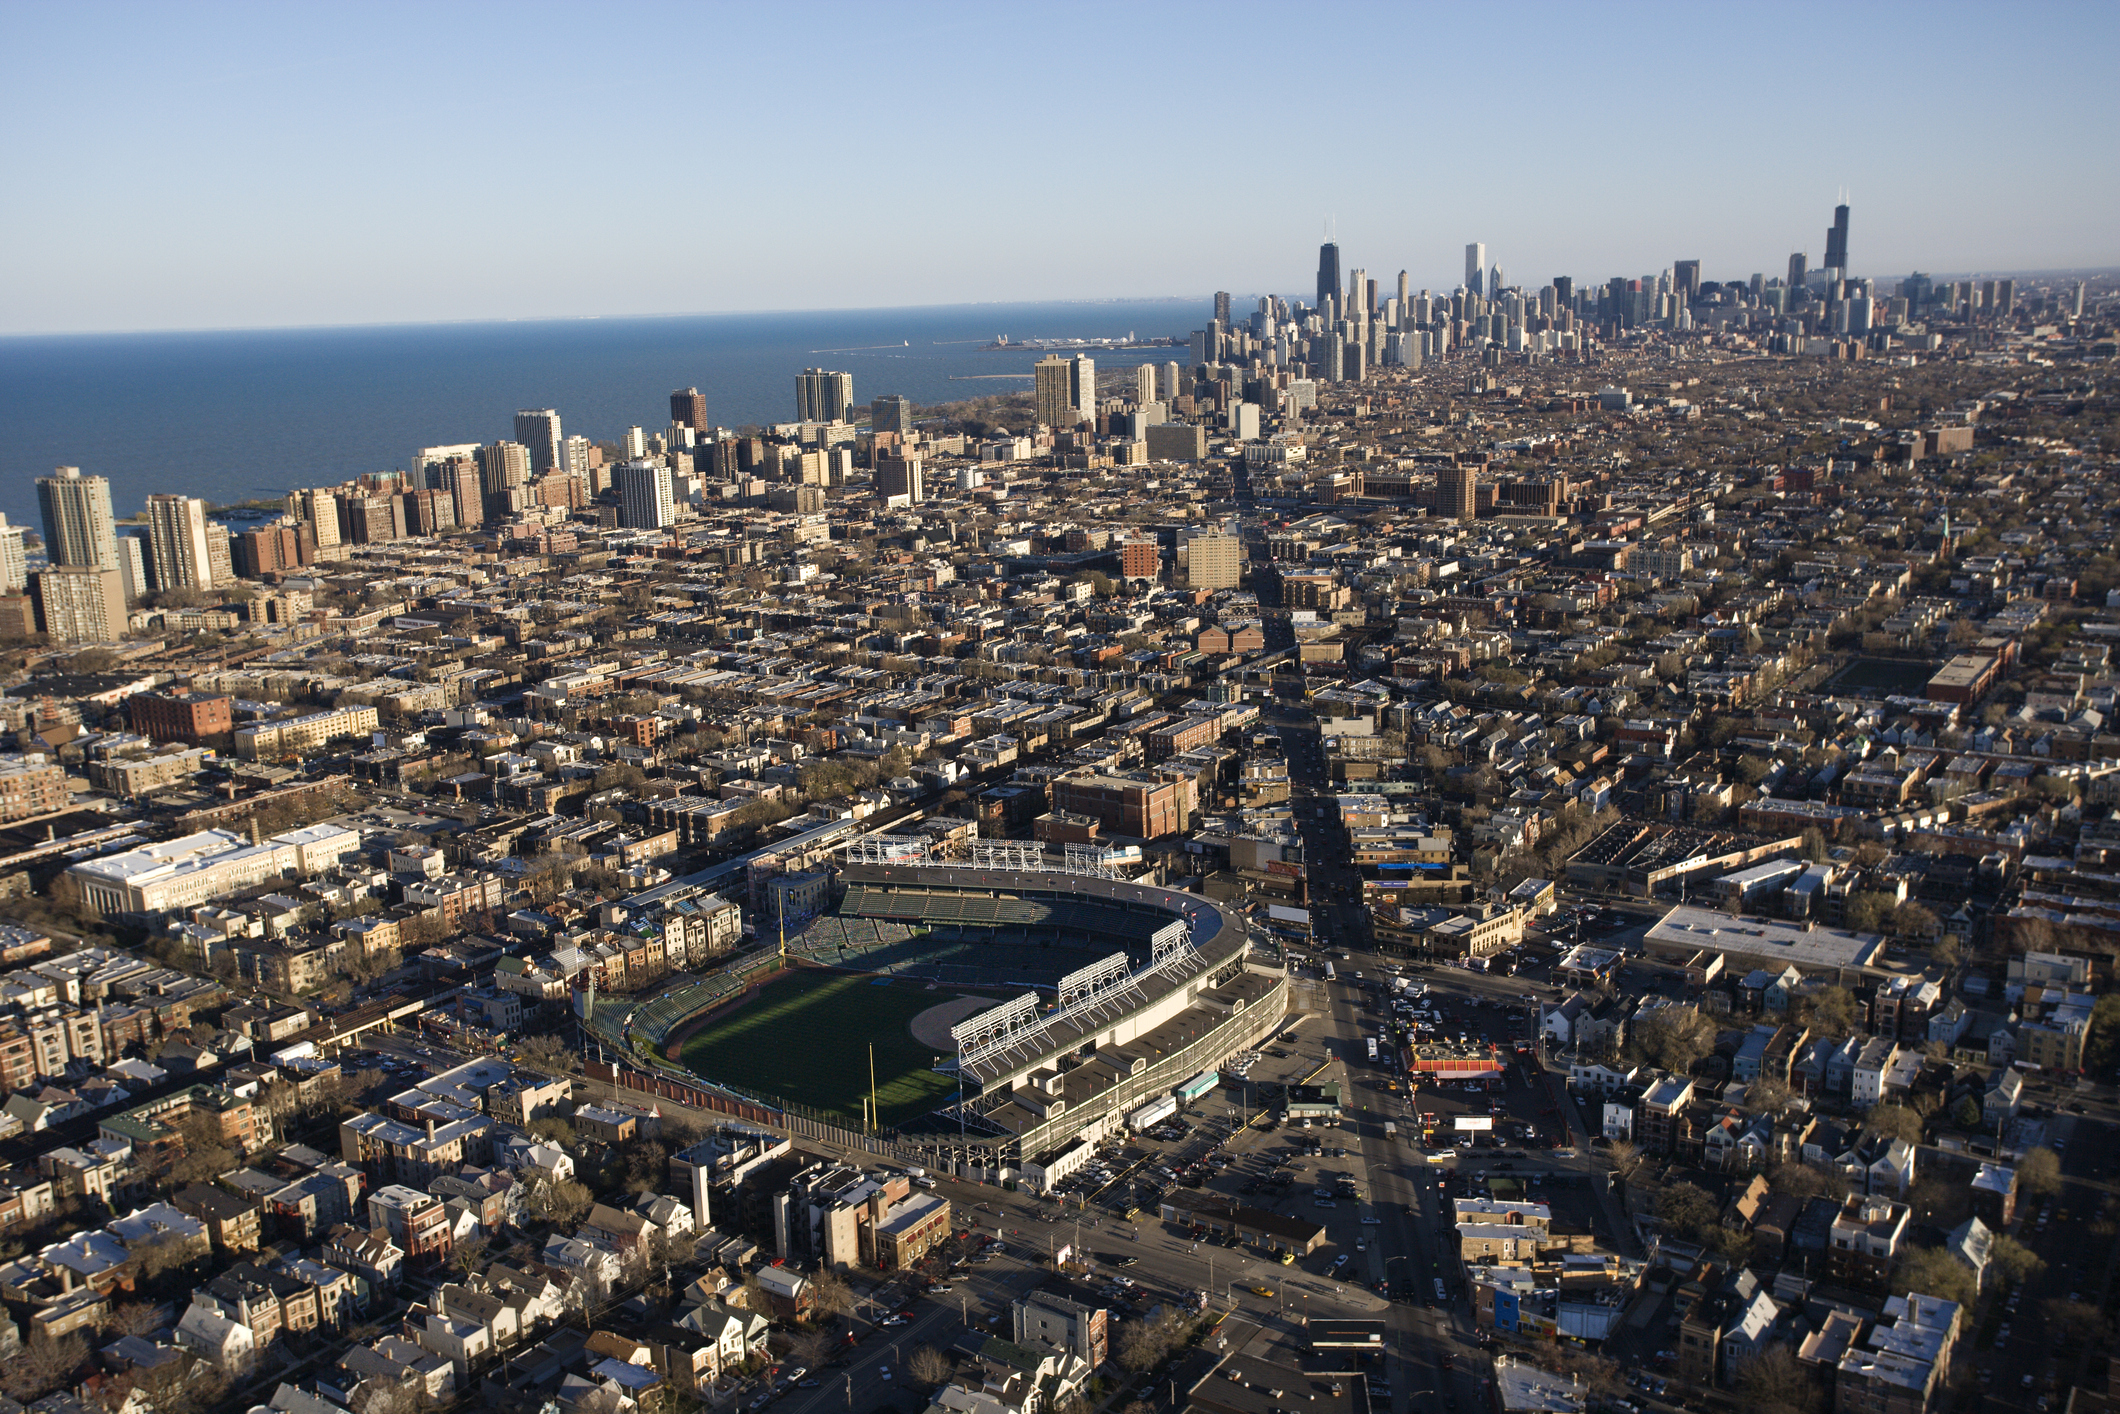 A new hotel is coming Chicagos Wrigley Field by Chicagoans for Chicagoans with the goal of energizing the area year round